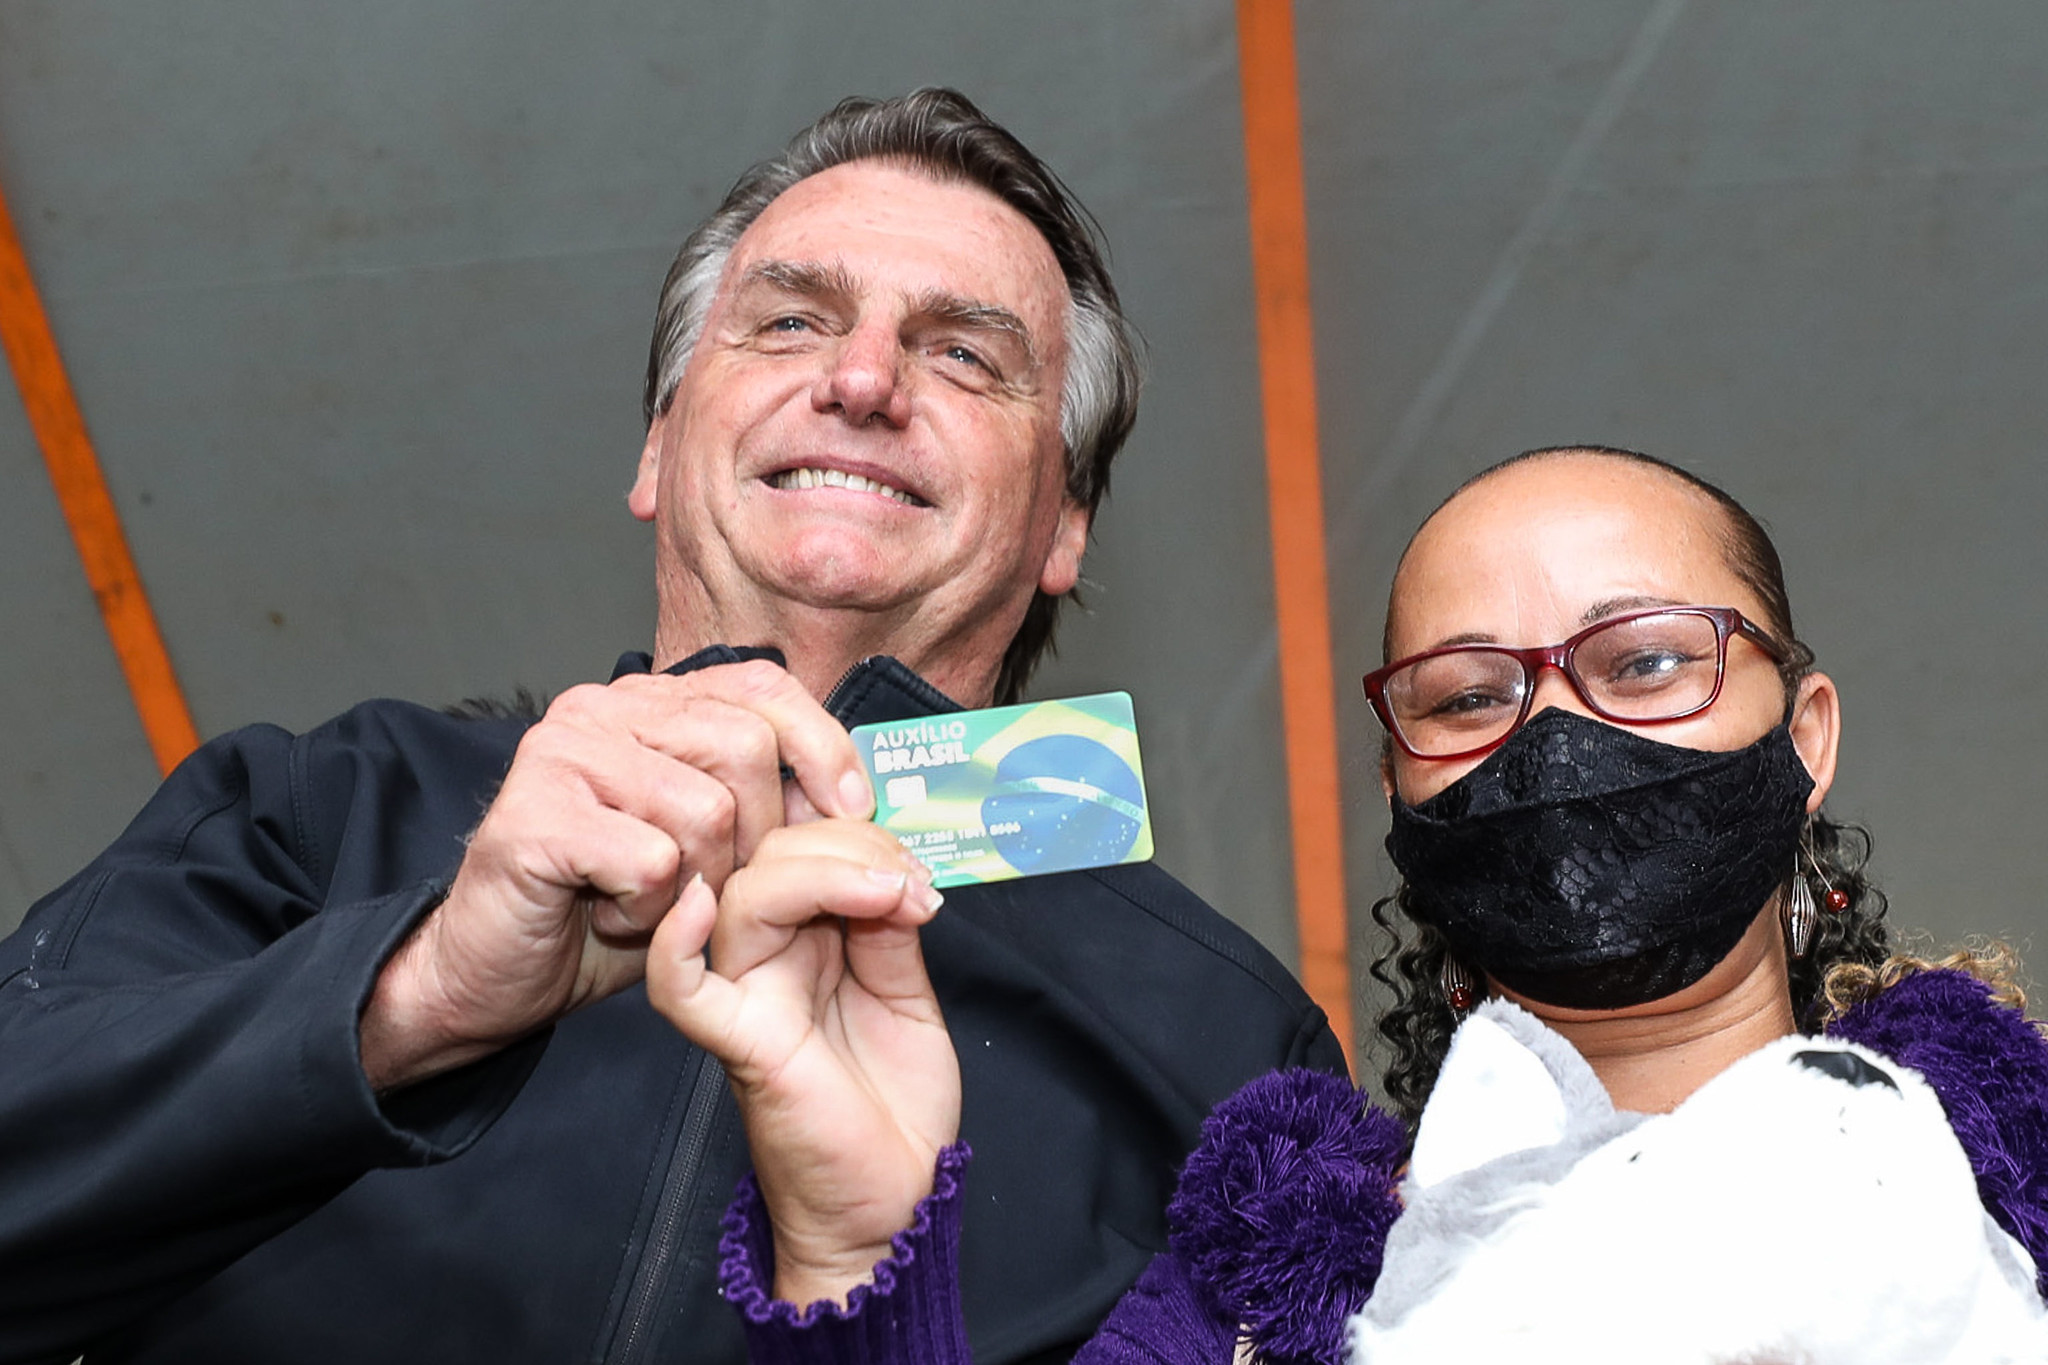 President Bolsonaro boosts social benefits for the poor ahead of elections